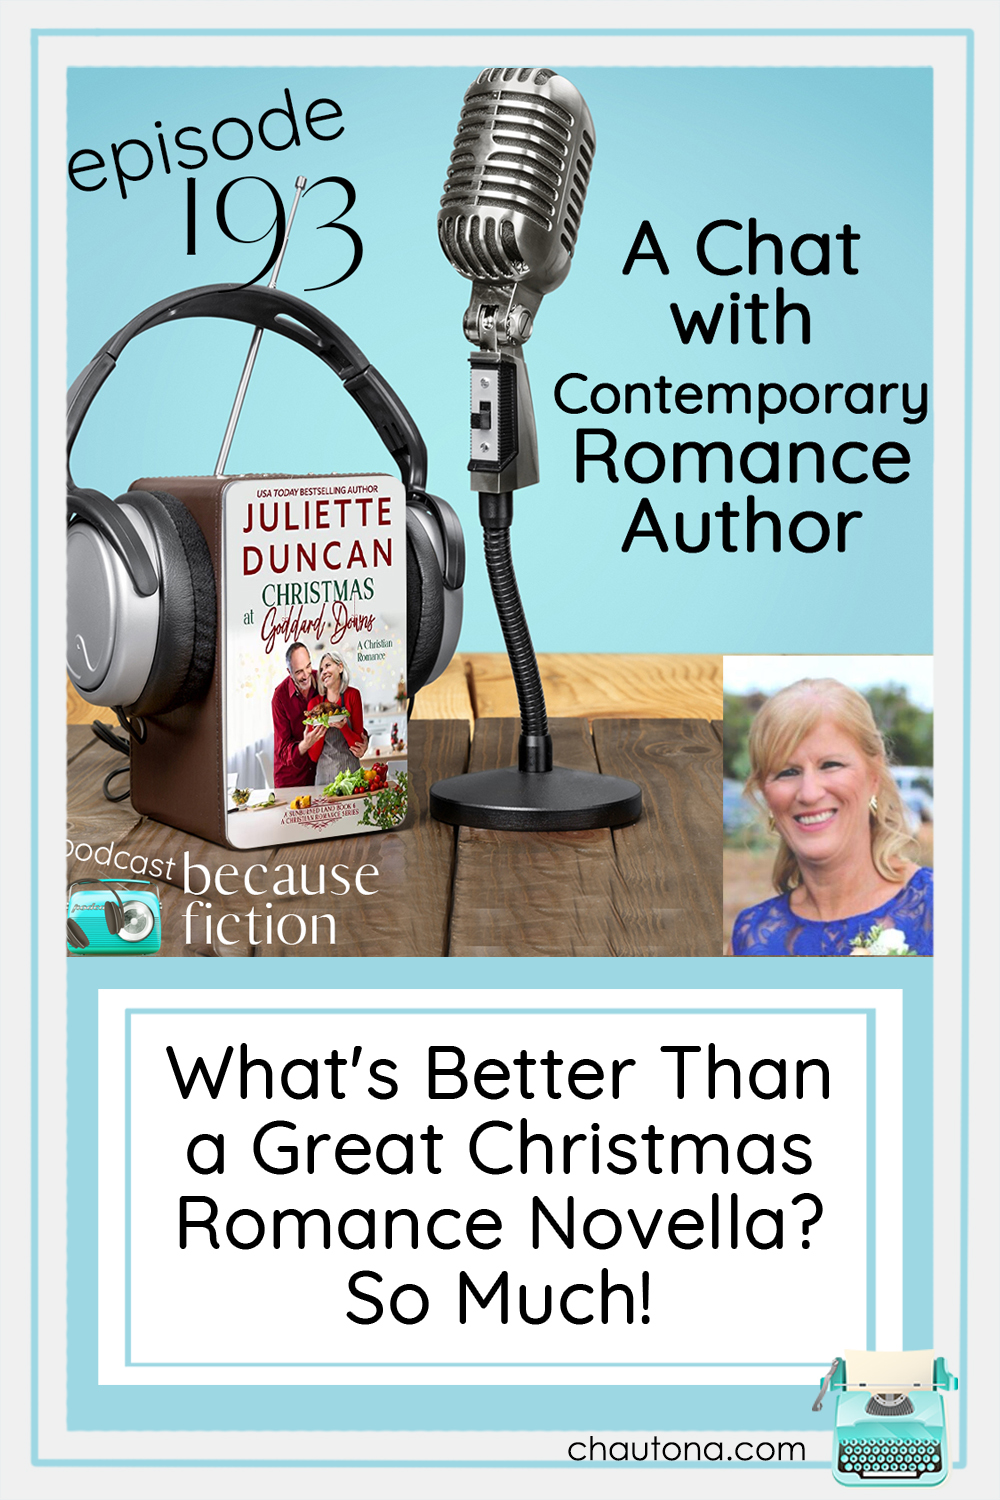 Today marks the release of Christmas at Goddard Downs by Juliette Duncan, and boy it sounds like a great one! via @chautonahavig